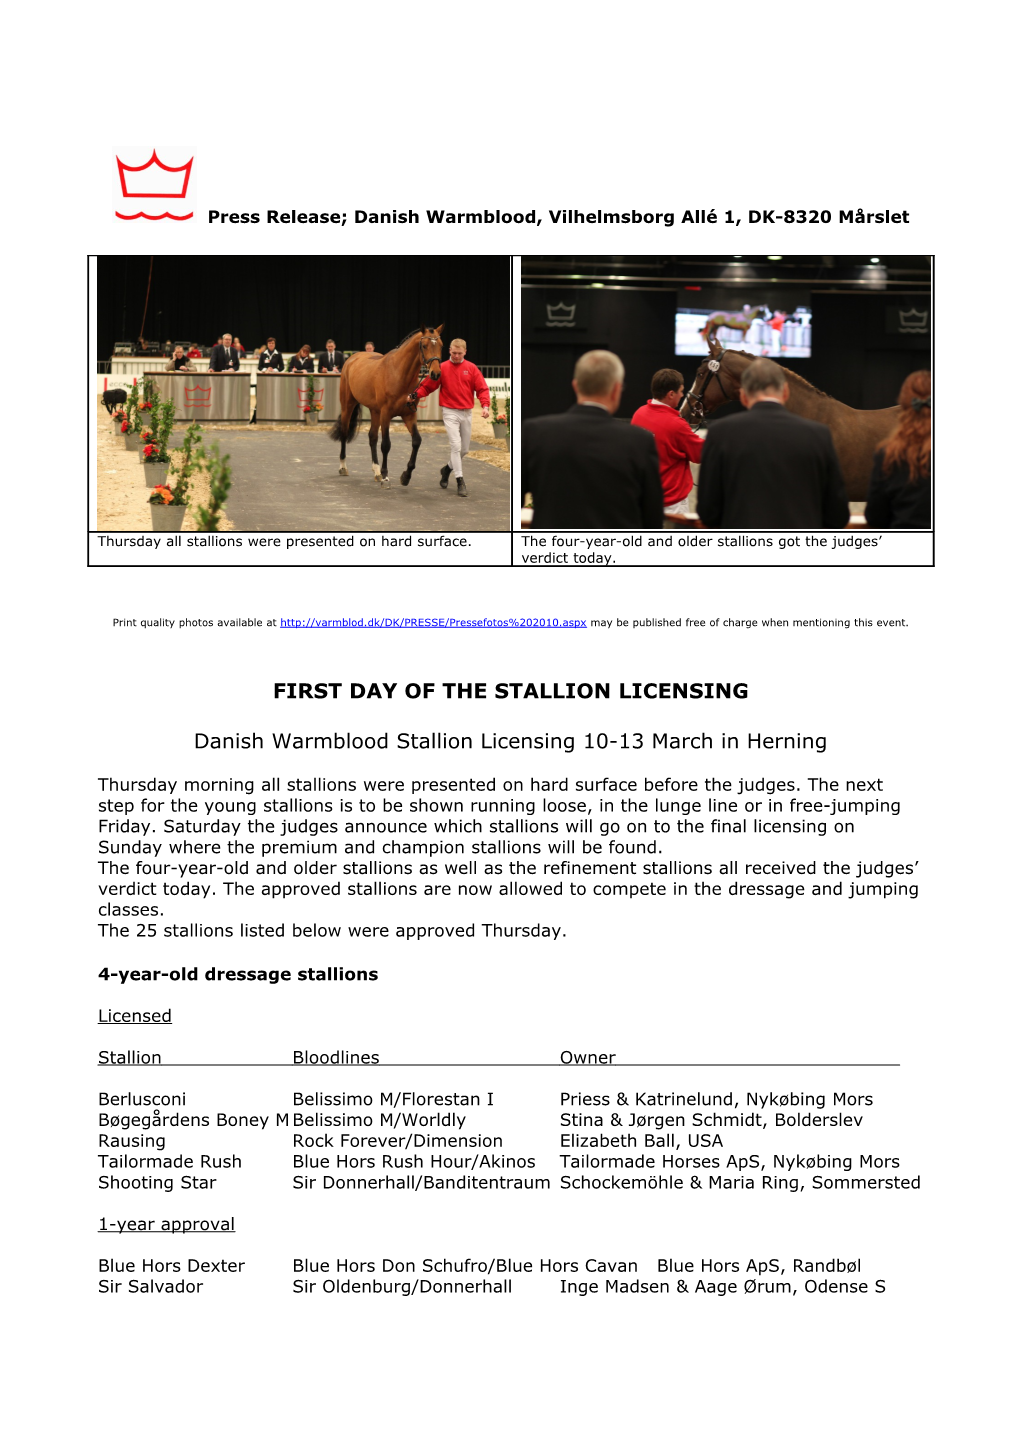 First Day of the Stallion Licensing